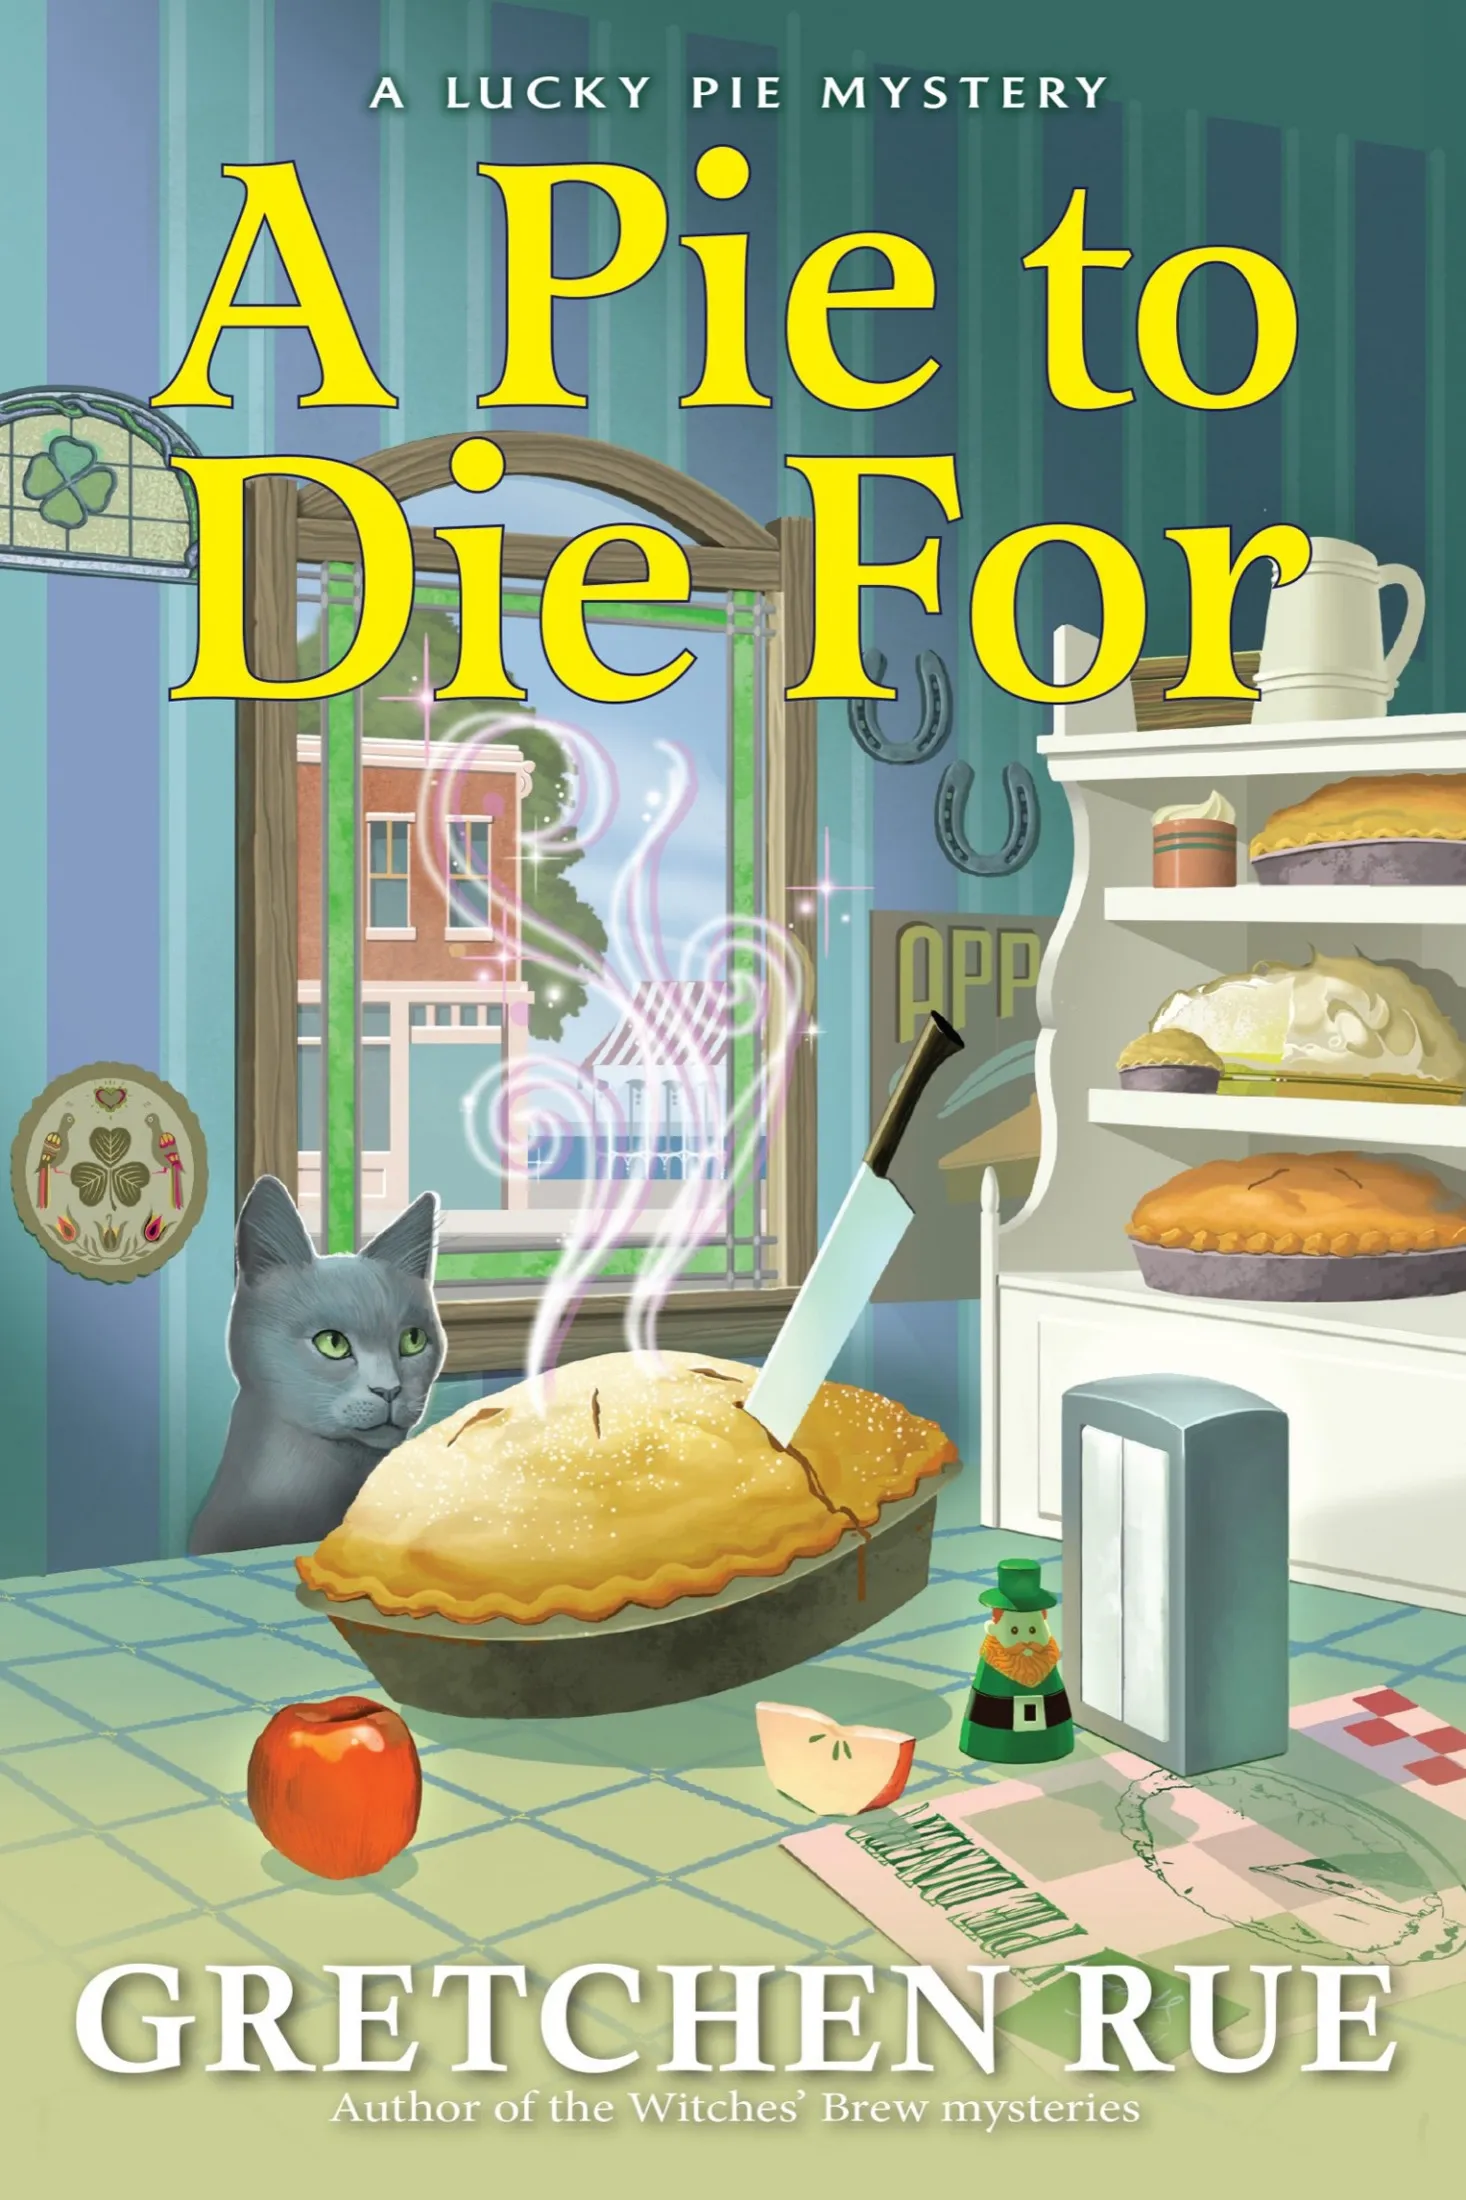 A Pie to Die For (A Lucky Pie Mystery #1)